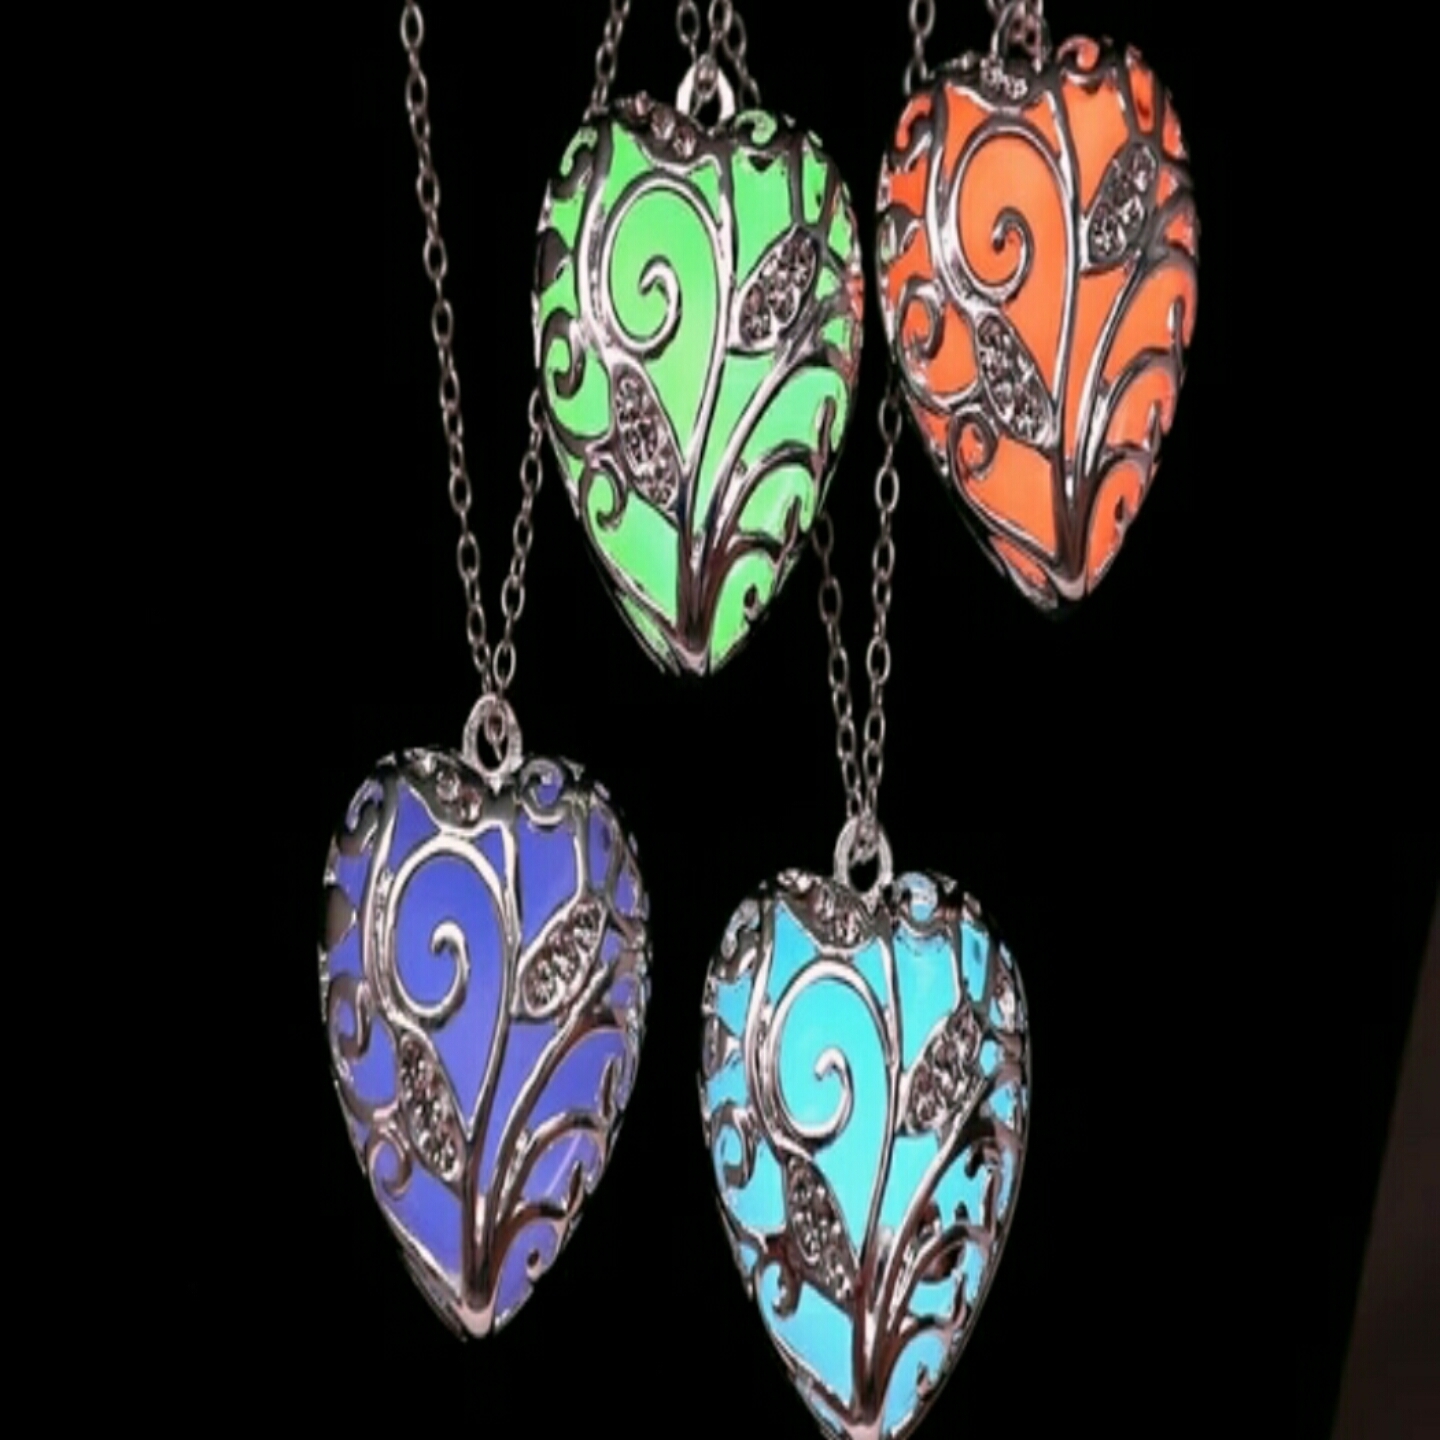 Glowing Pendant with Chain